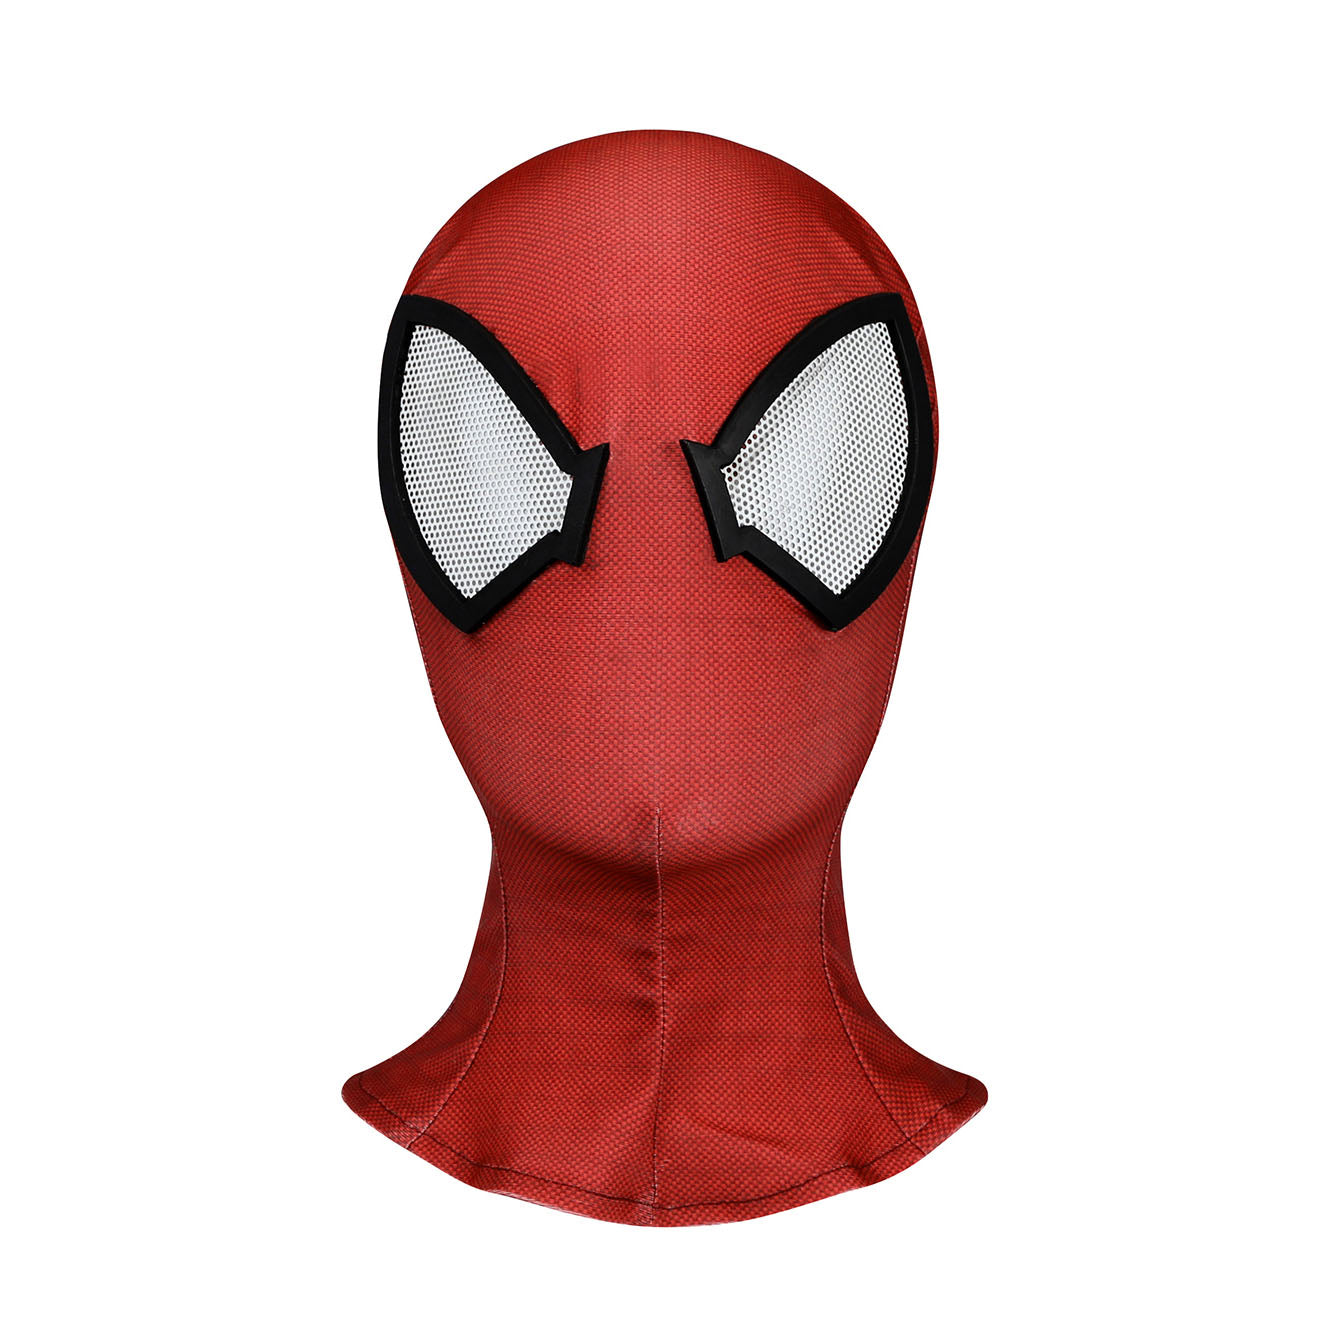 Spider-Man 2 Peter Parker Scarlet III Suit Male Jumpsuit Cosplay Costumes